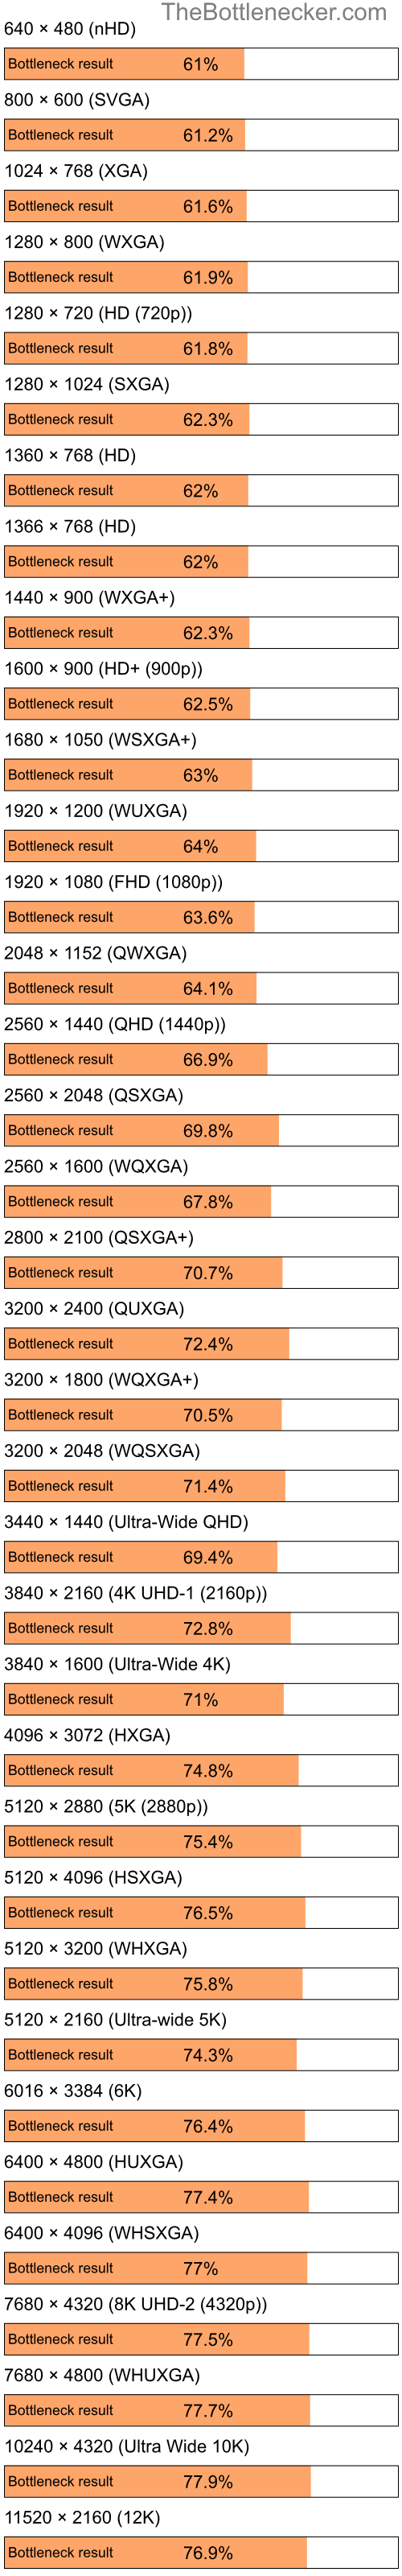 Bottleneck results by resolution for Intel Celeron M and NVIDIA Quadro FX 550 in Processor Intense Tasks